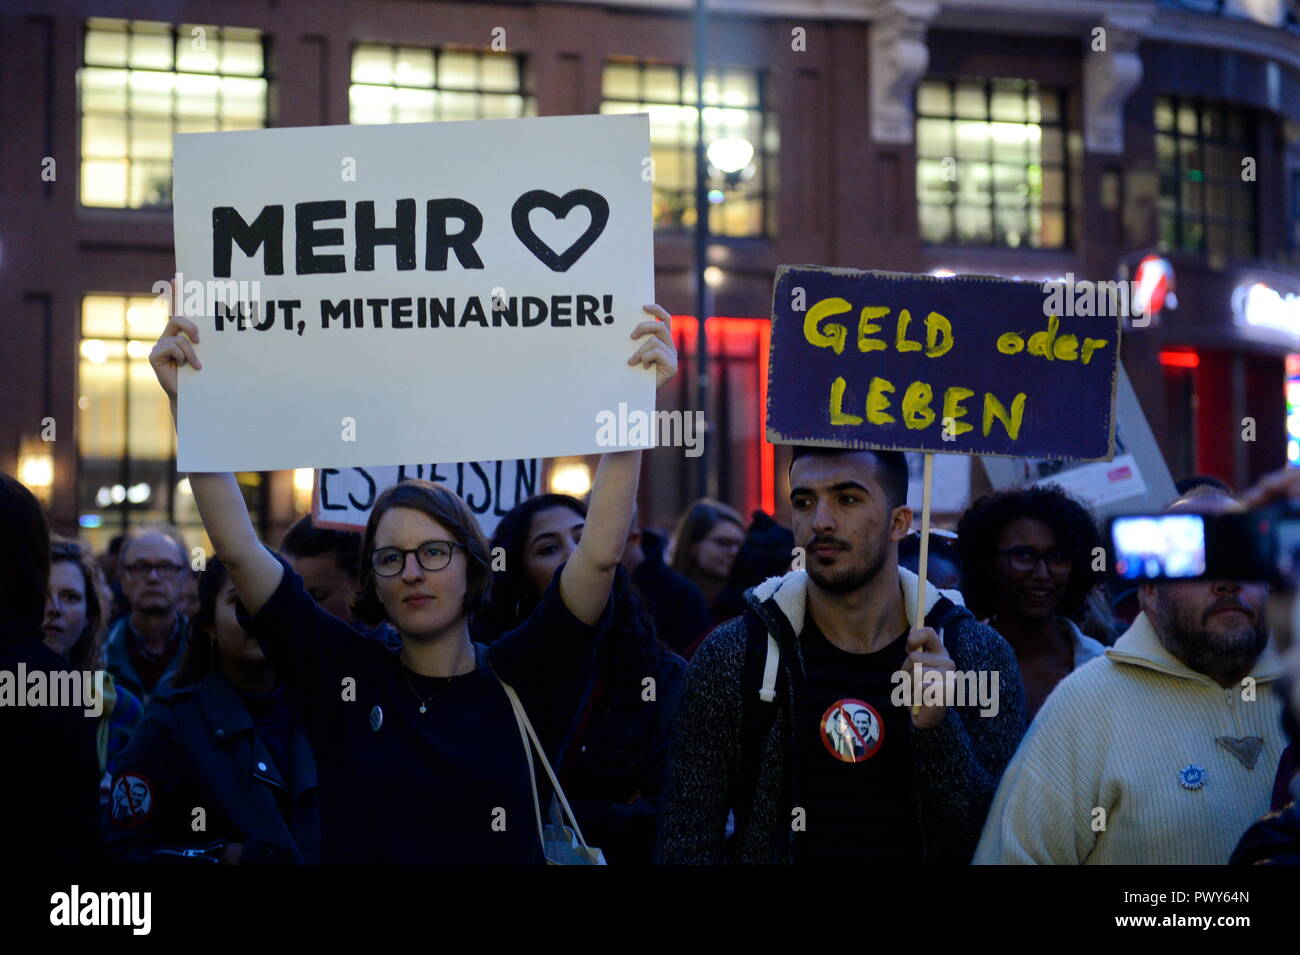 Vienna, Austria. 18 October 2018. The Thursday demonstrations against the current Federal Government are reactivated. The rally was called on Stephansplatz. The protests will then be continued every week at various locations in Vienna. Picture shows signs saying 'More courage with each other and money or life'. Credit: Franz Perc / Alamy Live News Stock Photo